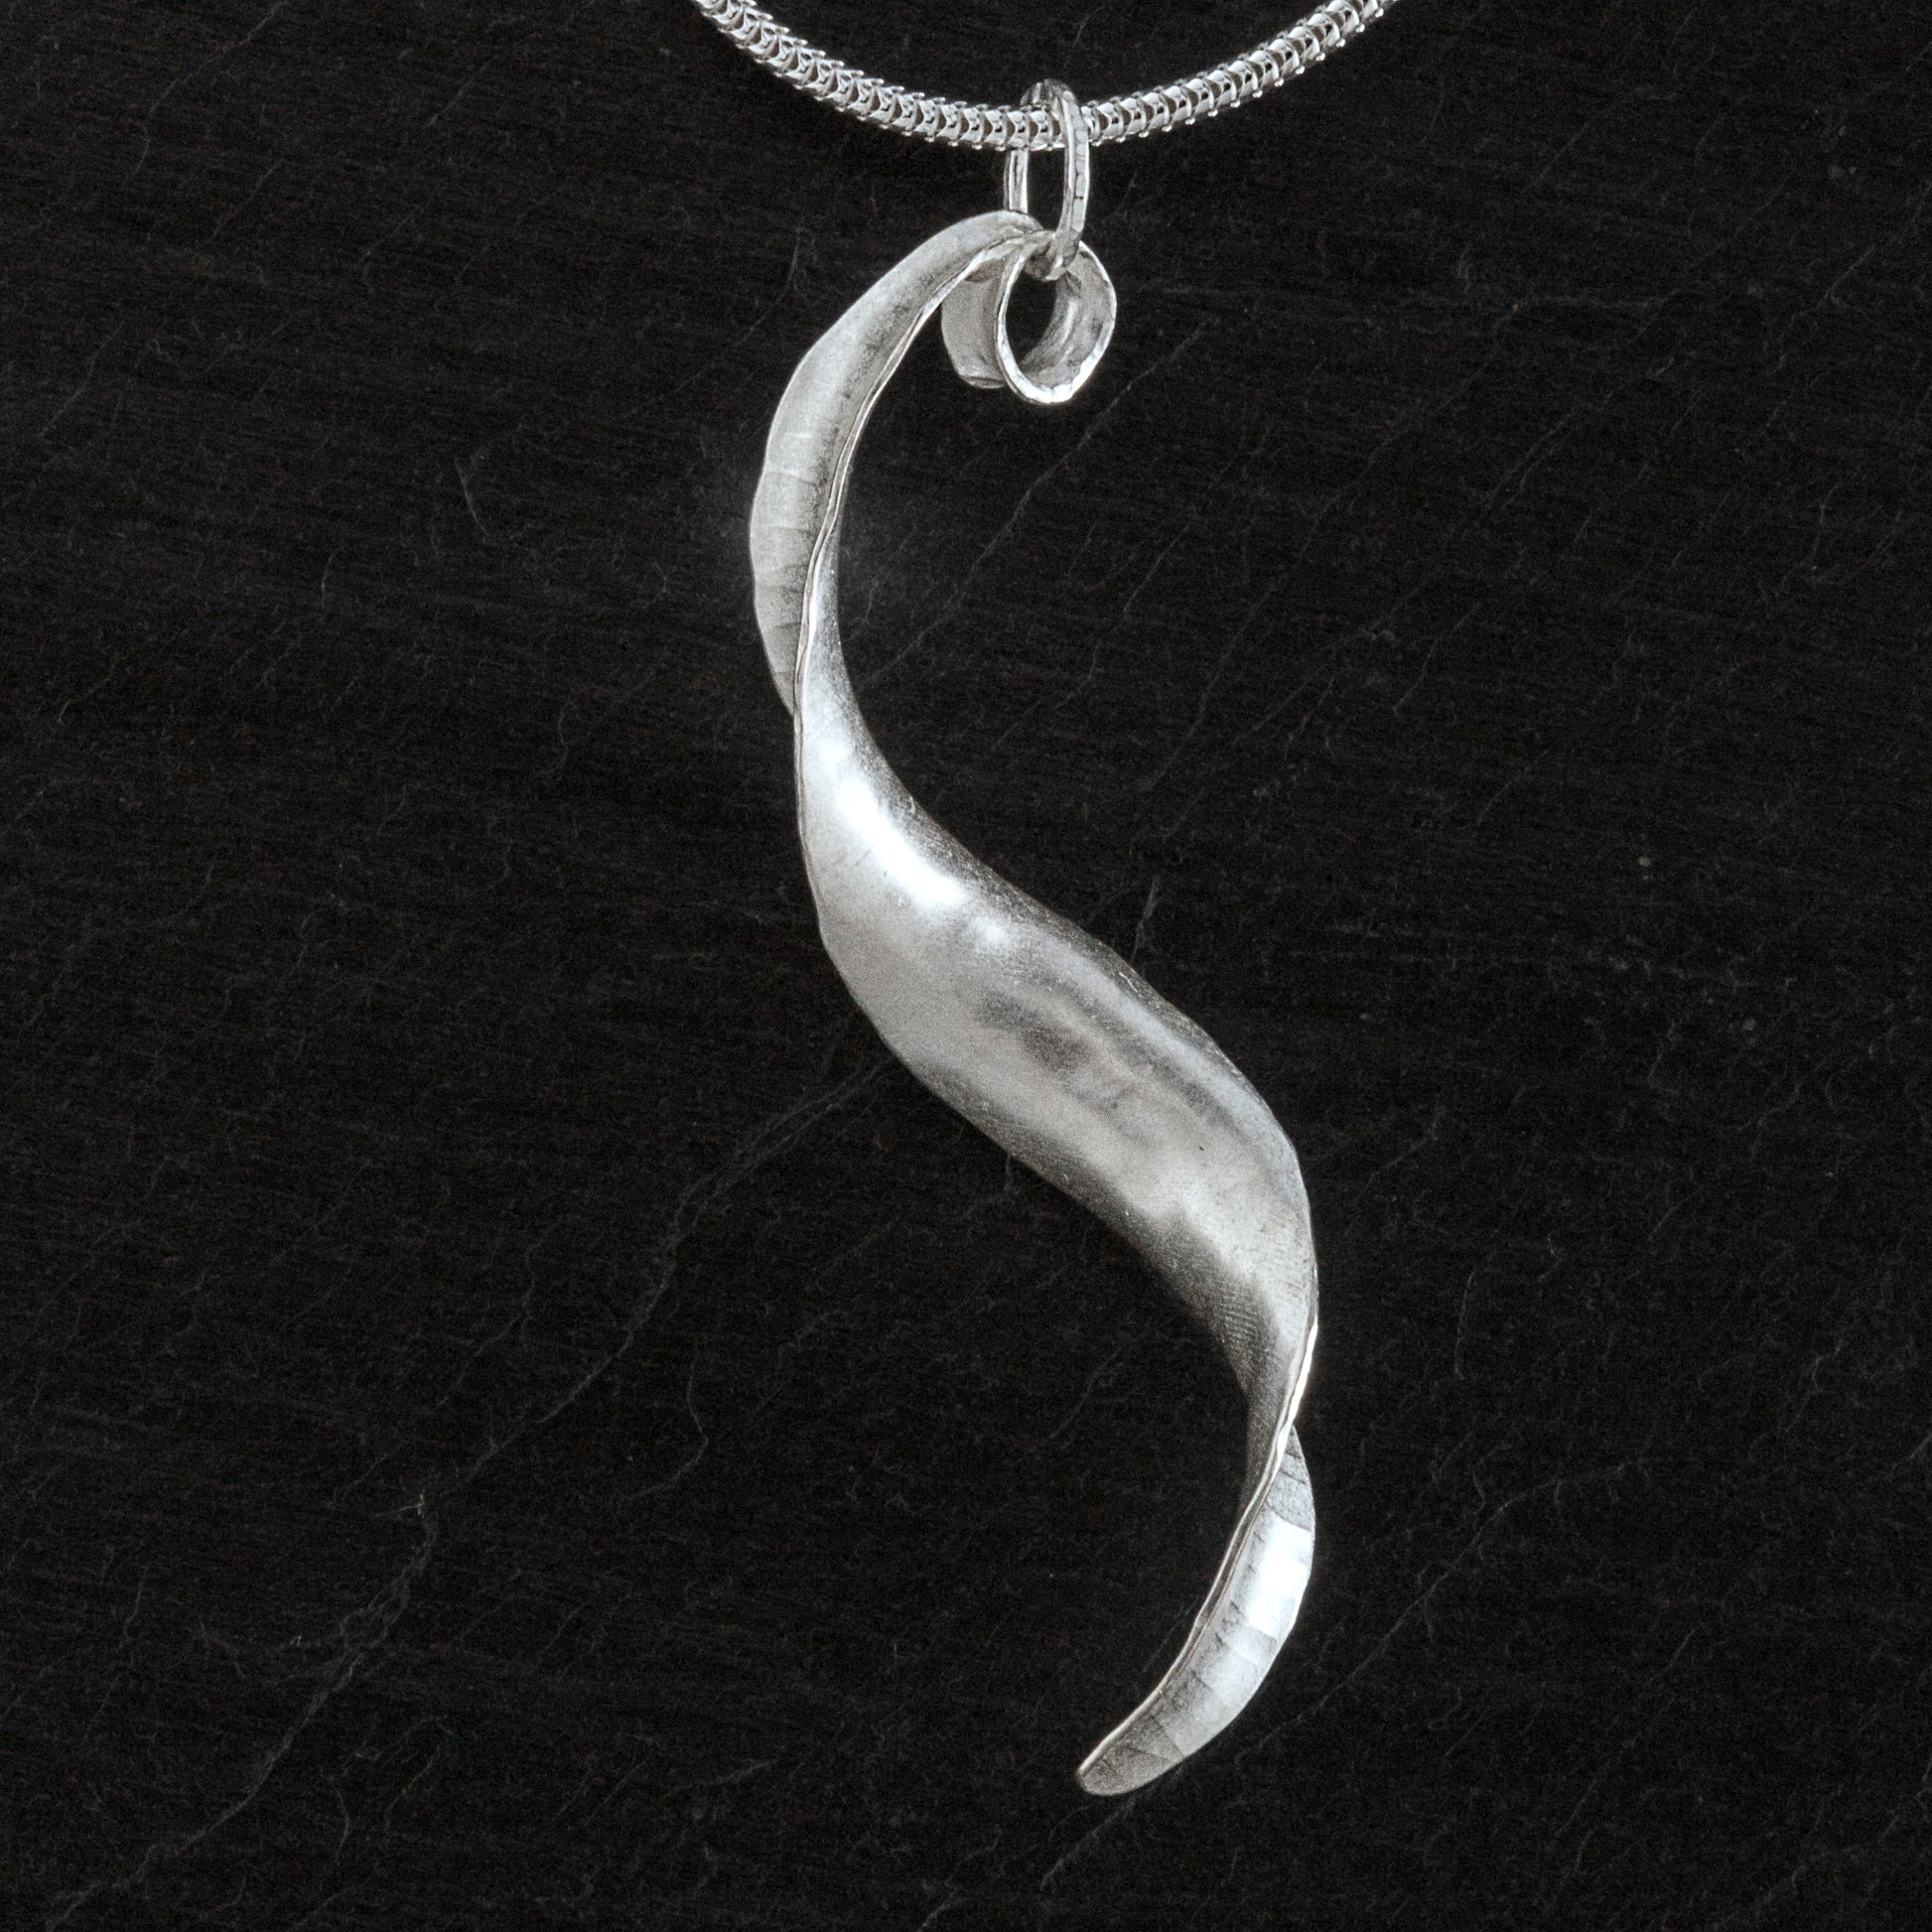 Handmade twisted silver necklace made from recycled silver with hammered texture, burnished edges and satin-matte finish, hanging from a sterling silver snake chain. It has the shape of a reversed s and an itegral loop by which it hangs from the chain. Back view.